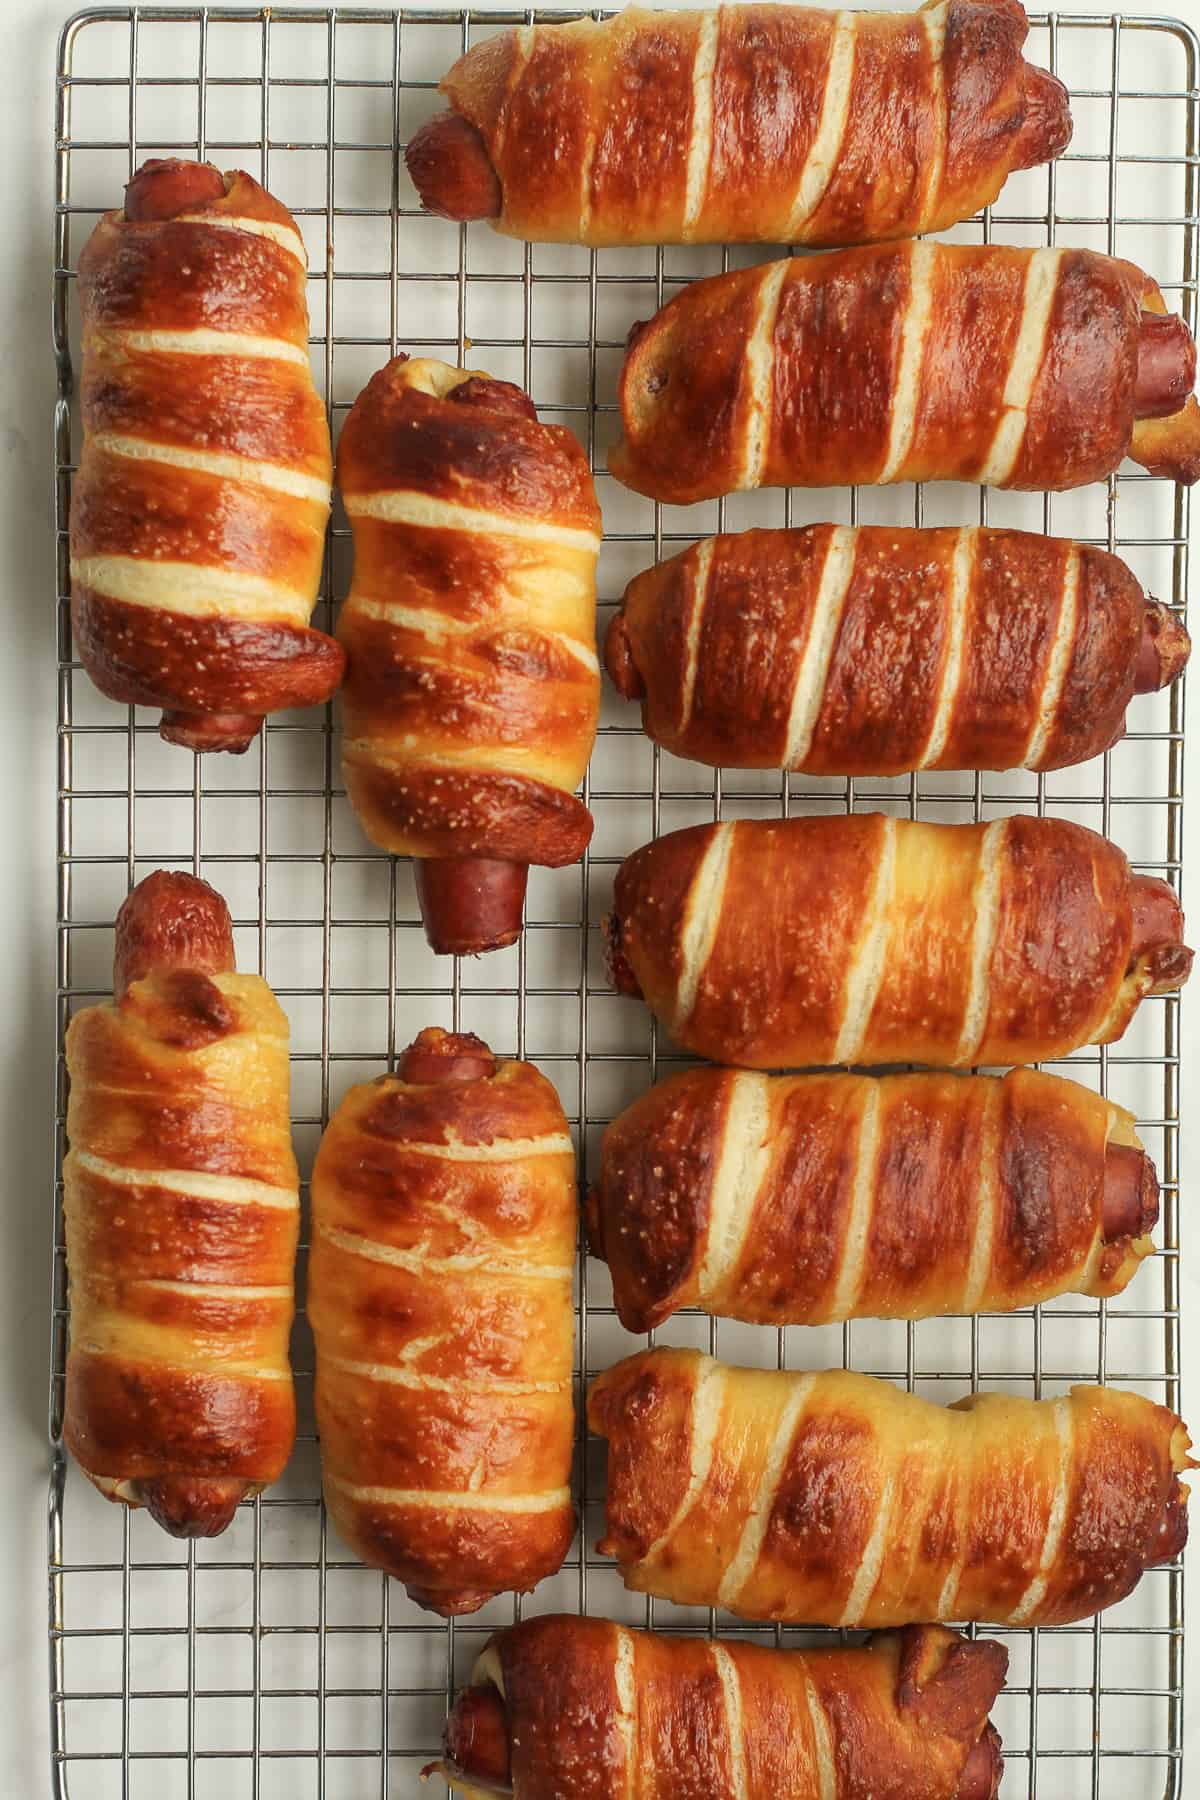 The pretzel dogs cooling on a rack.